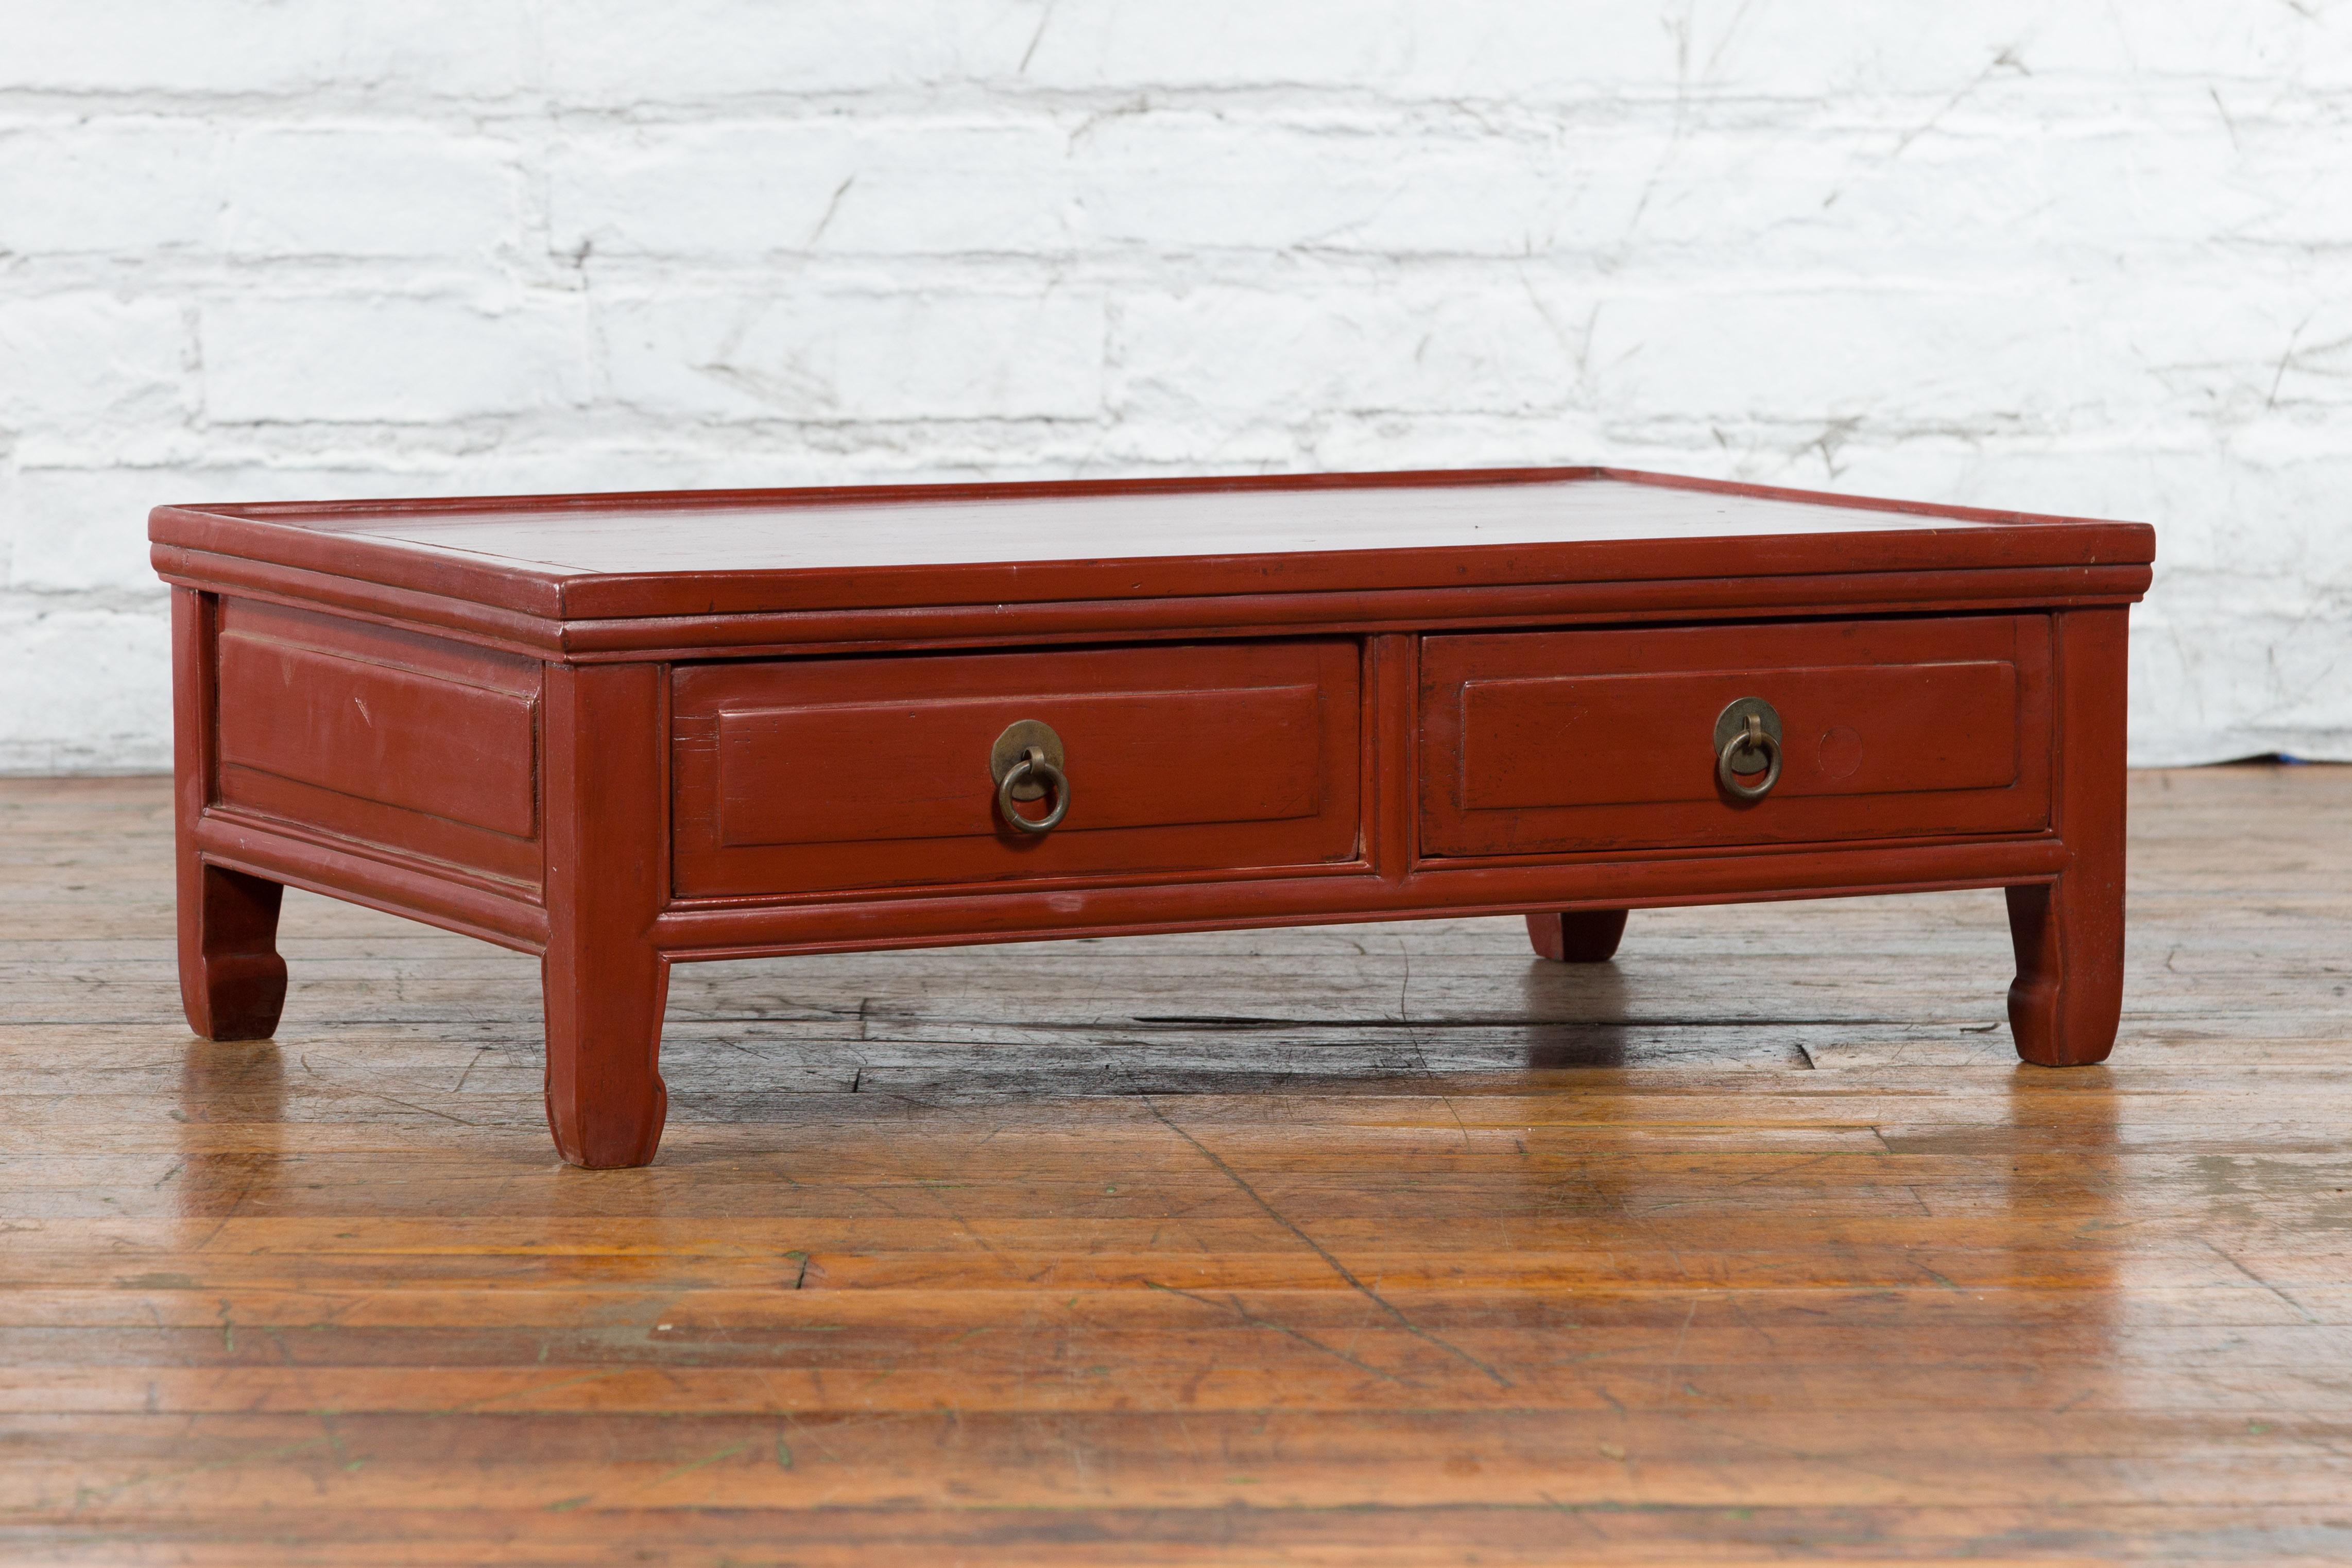 Qing Dynasty Red Lacquer Low Kang Coffee Table with Drawers and Horse Hoof Feet For Sale 7